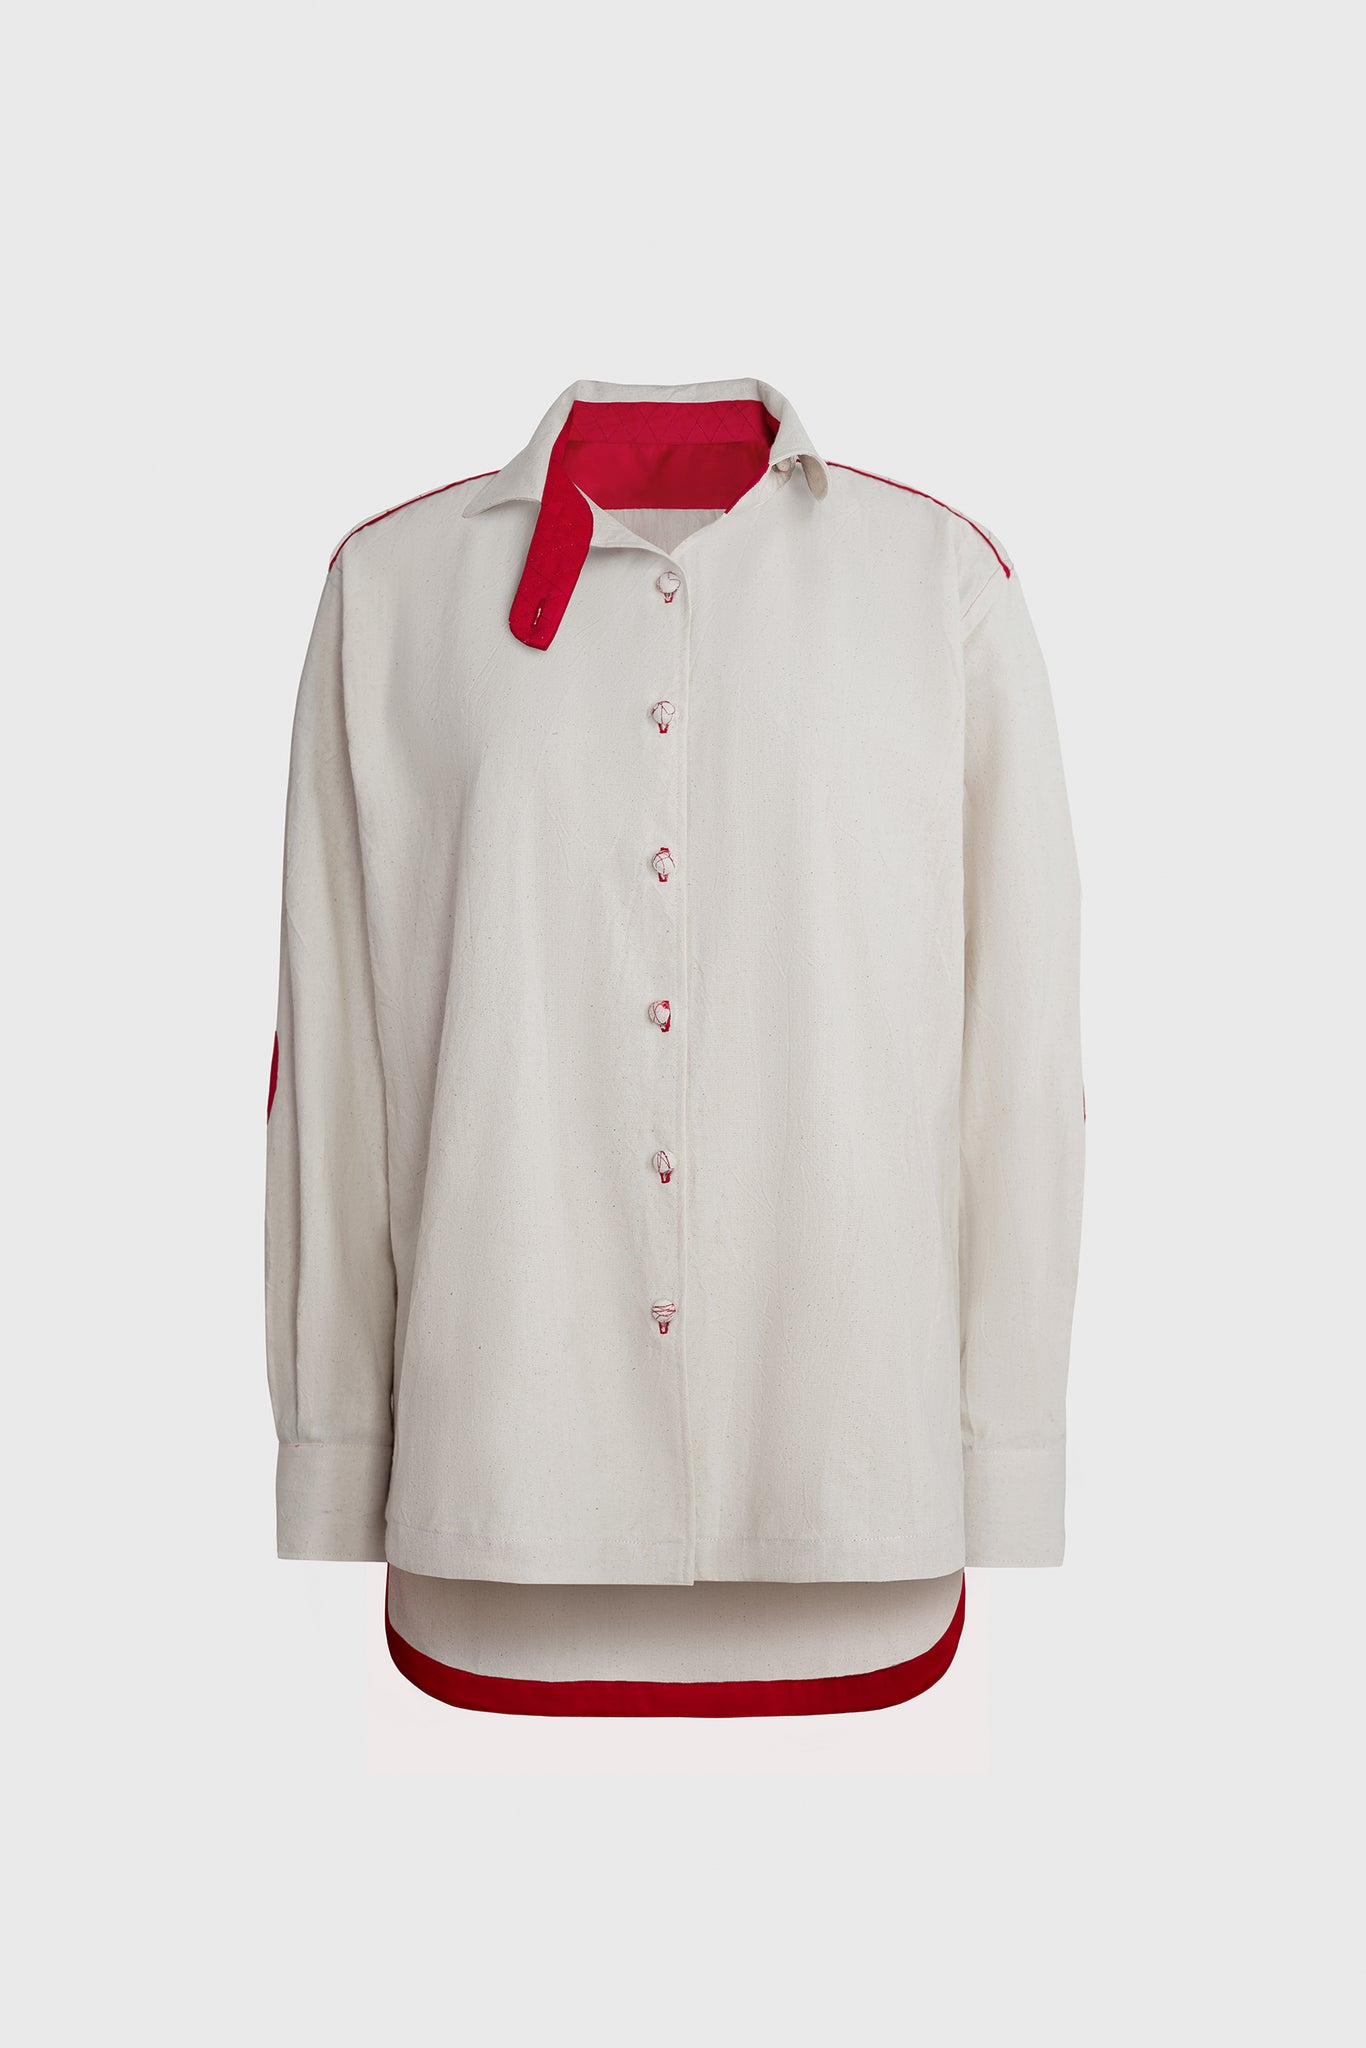 Ruxandra designed tailored shirt, detailed sleeves with heart patch and placket, quality finish, longer back hem, cuffs with buttons, front button closure, special extended collar stand and button neck closure, white and red colors, elegant and casual, style with pleated skirt or long contrasting trousers, for office fashion, playful fashion touch